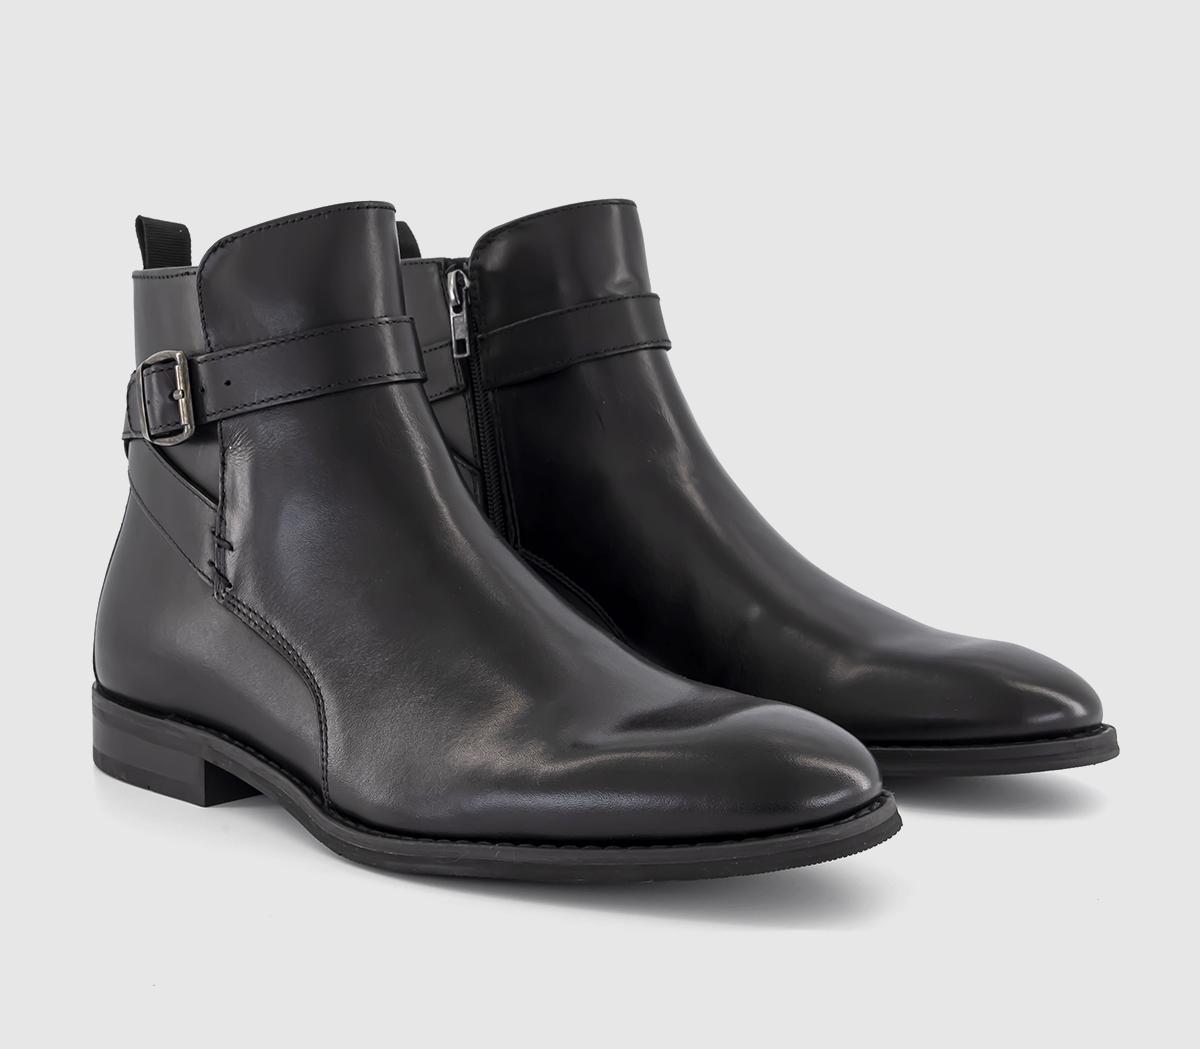 OFFICE Belfort Ankle Strap Boots Black Leather - Men’s Boots